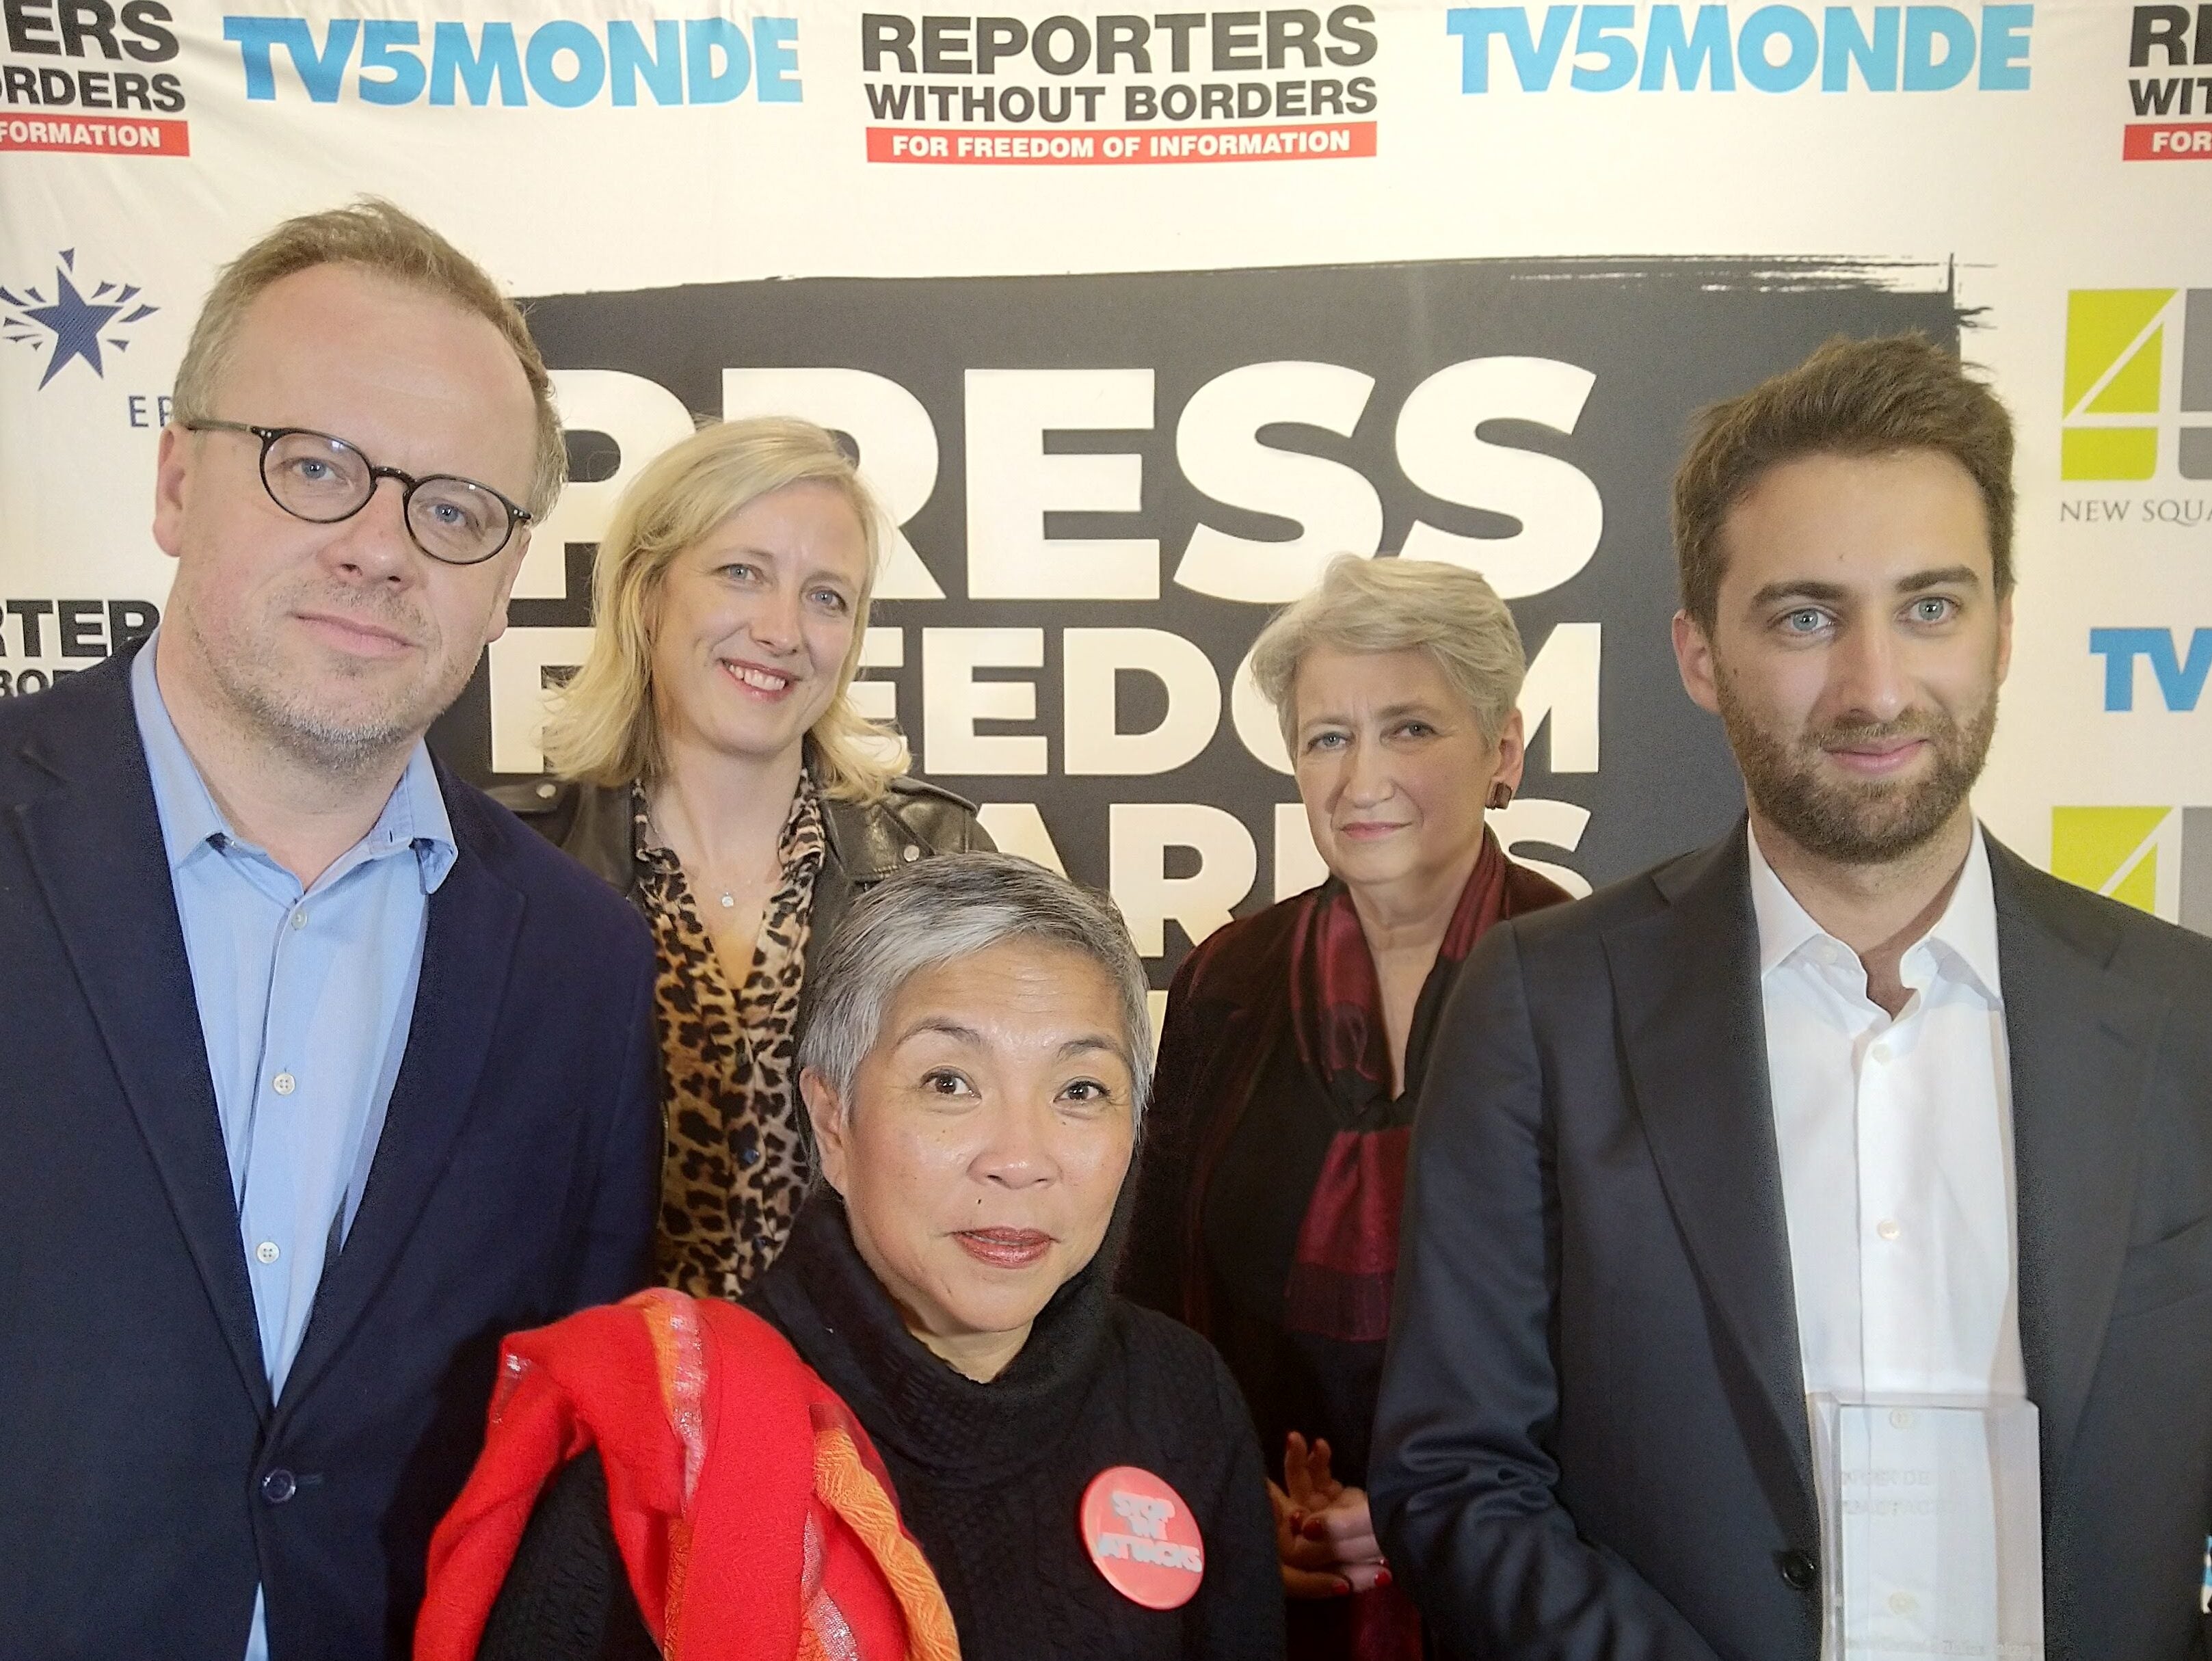 Observer's Carole Cadwalladr warns of daily 'war on truth' on social media platforms as she collects press freedom prize